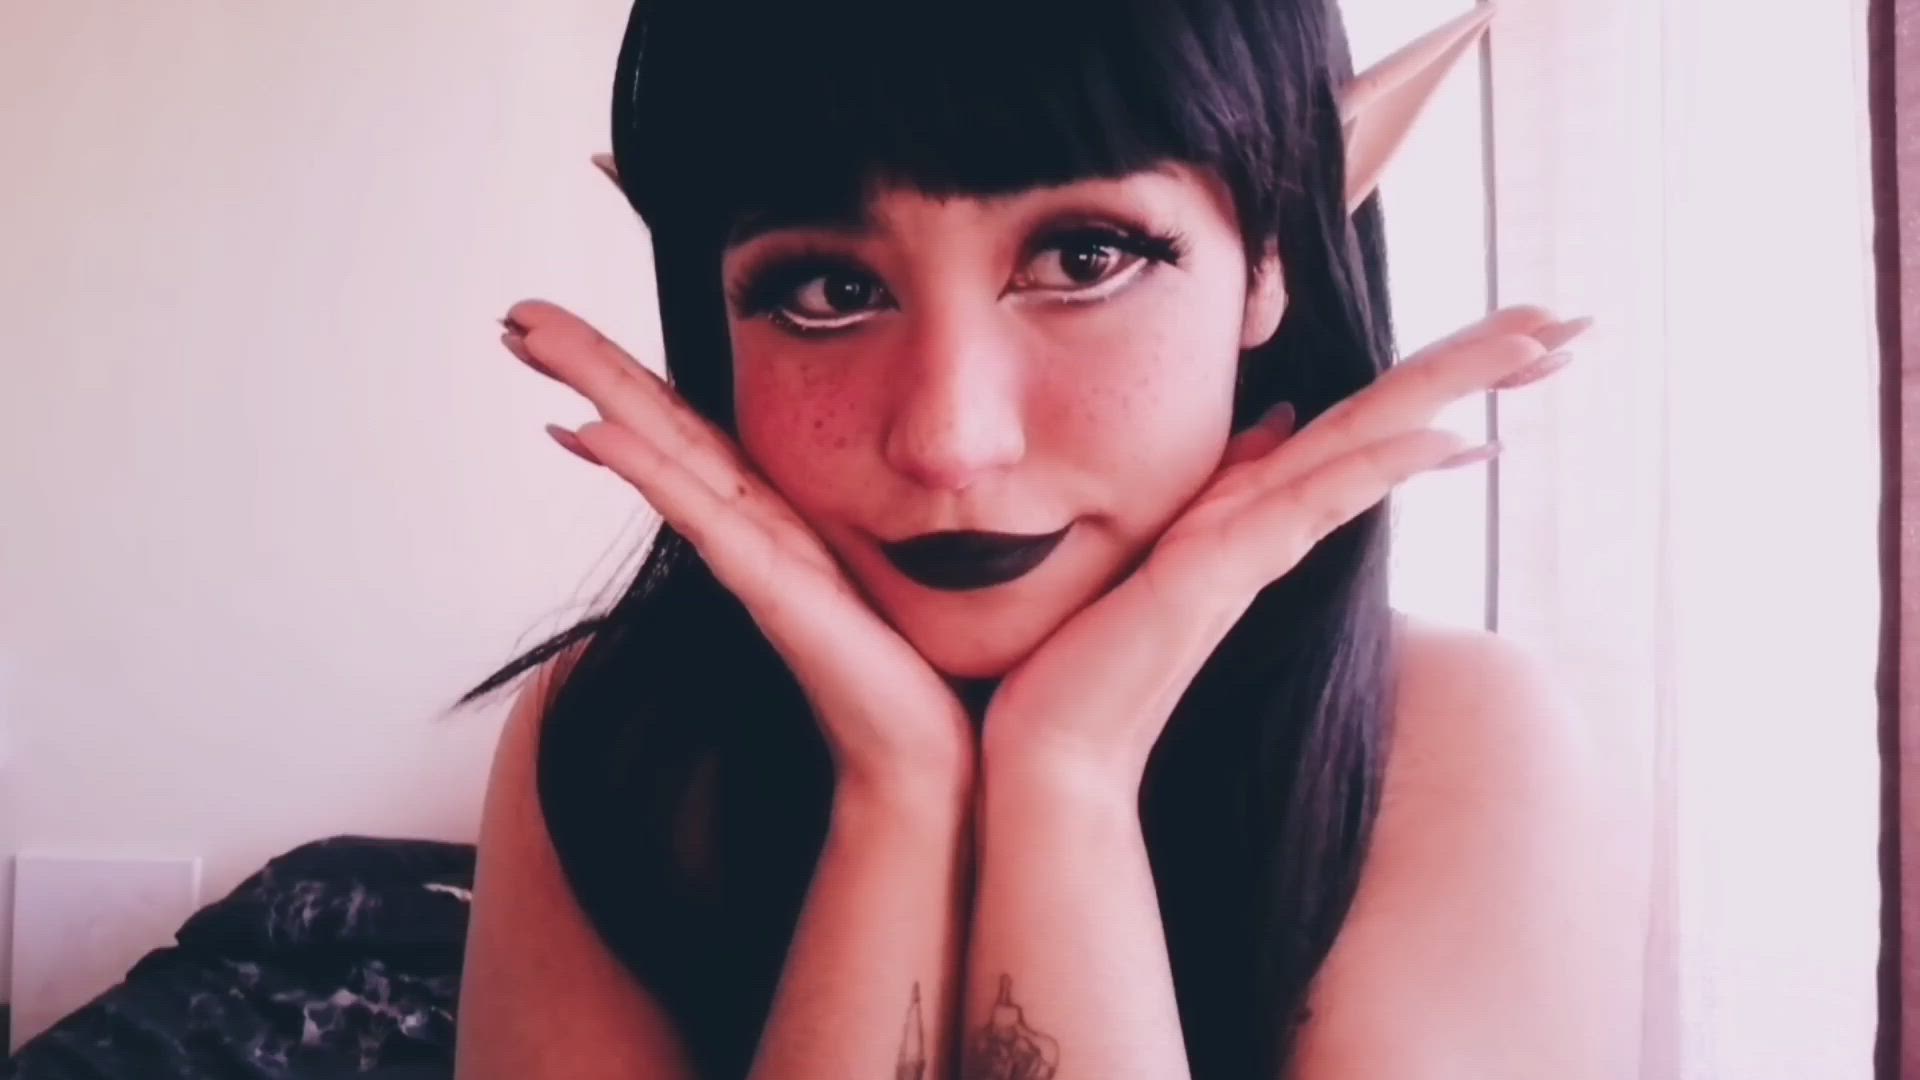 Ahegao porn video with onlyfans model Nyanaew <strong>@nyanaew</strong>